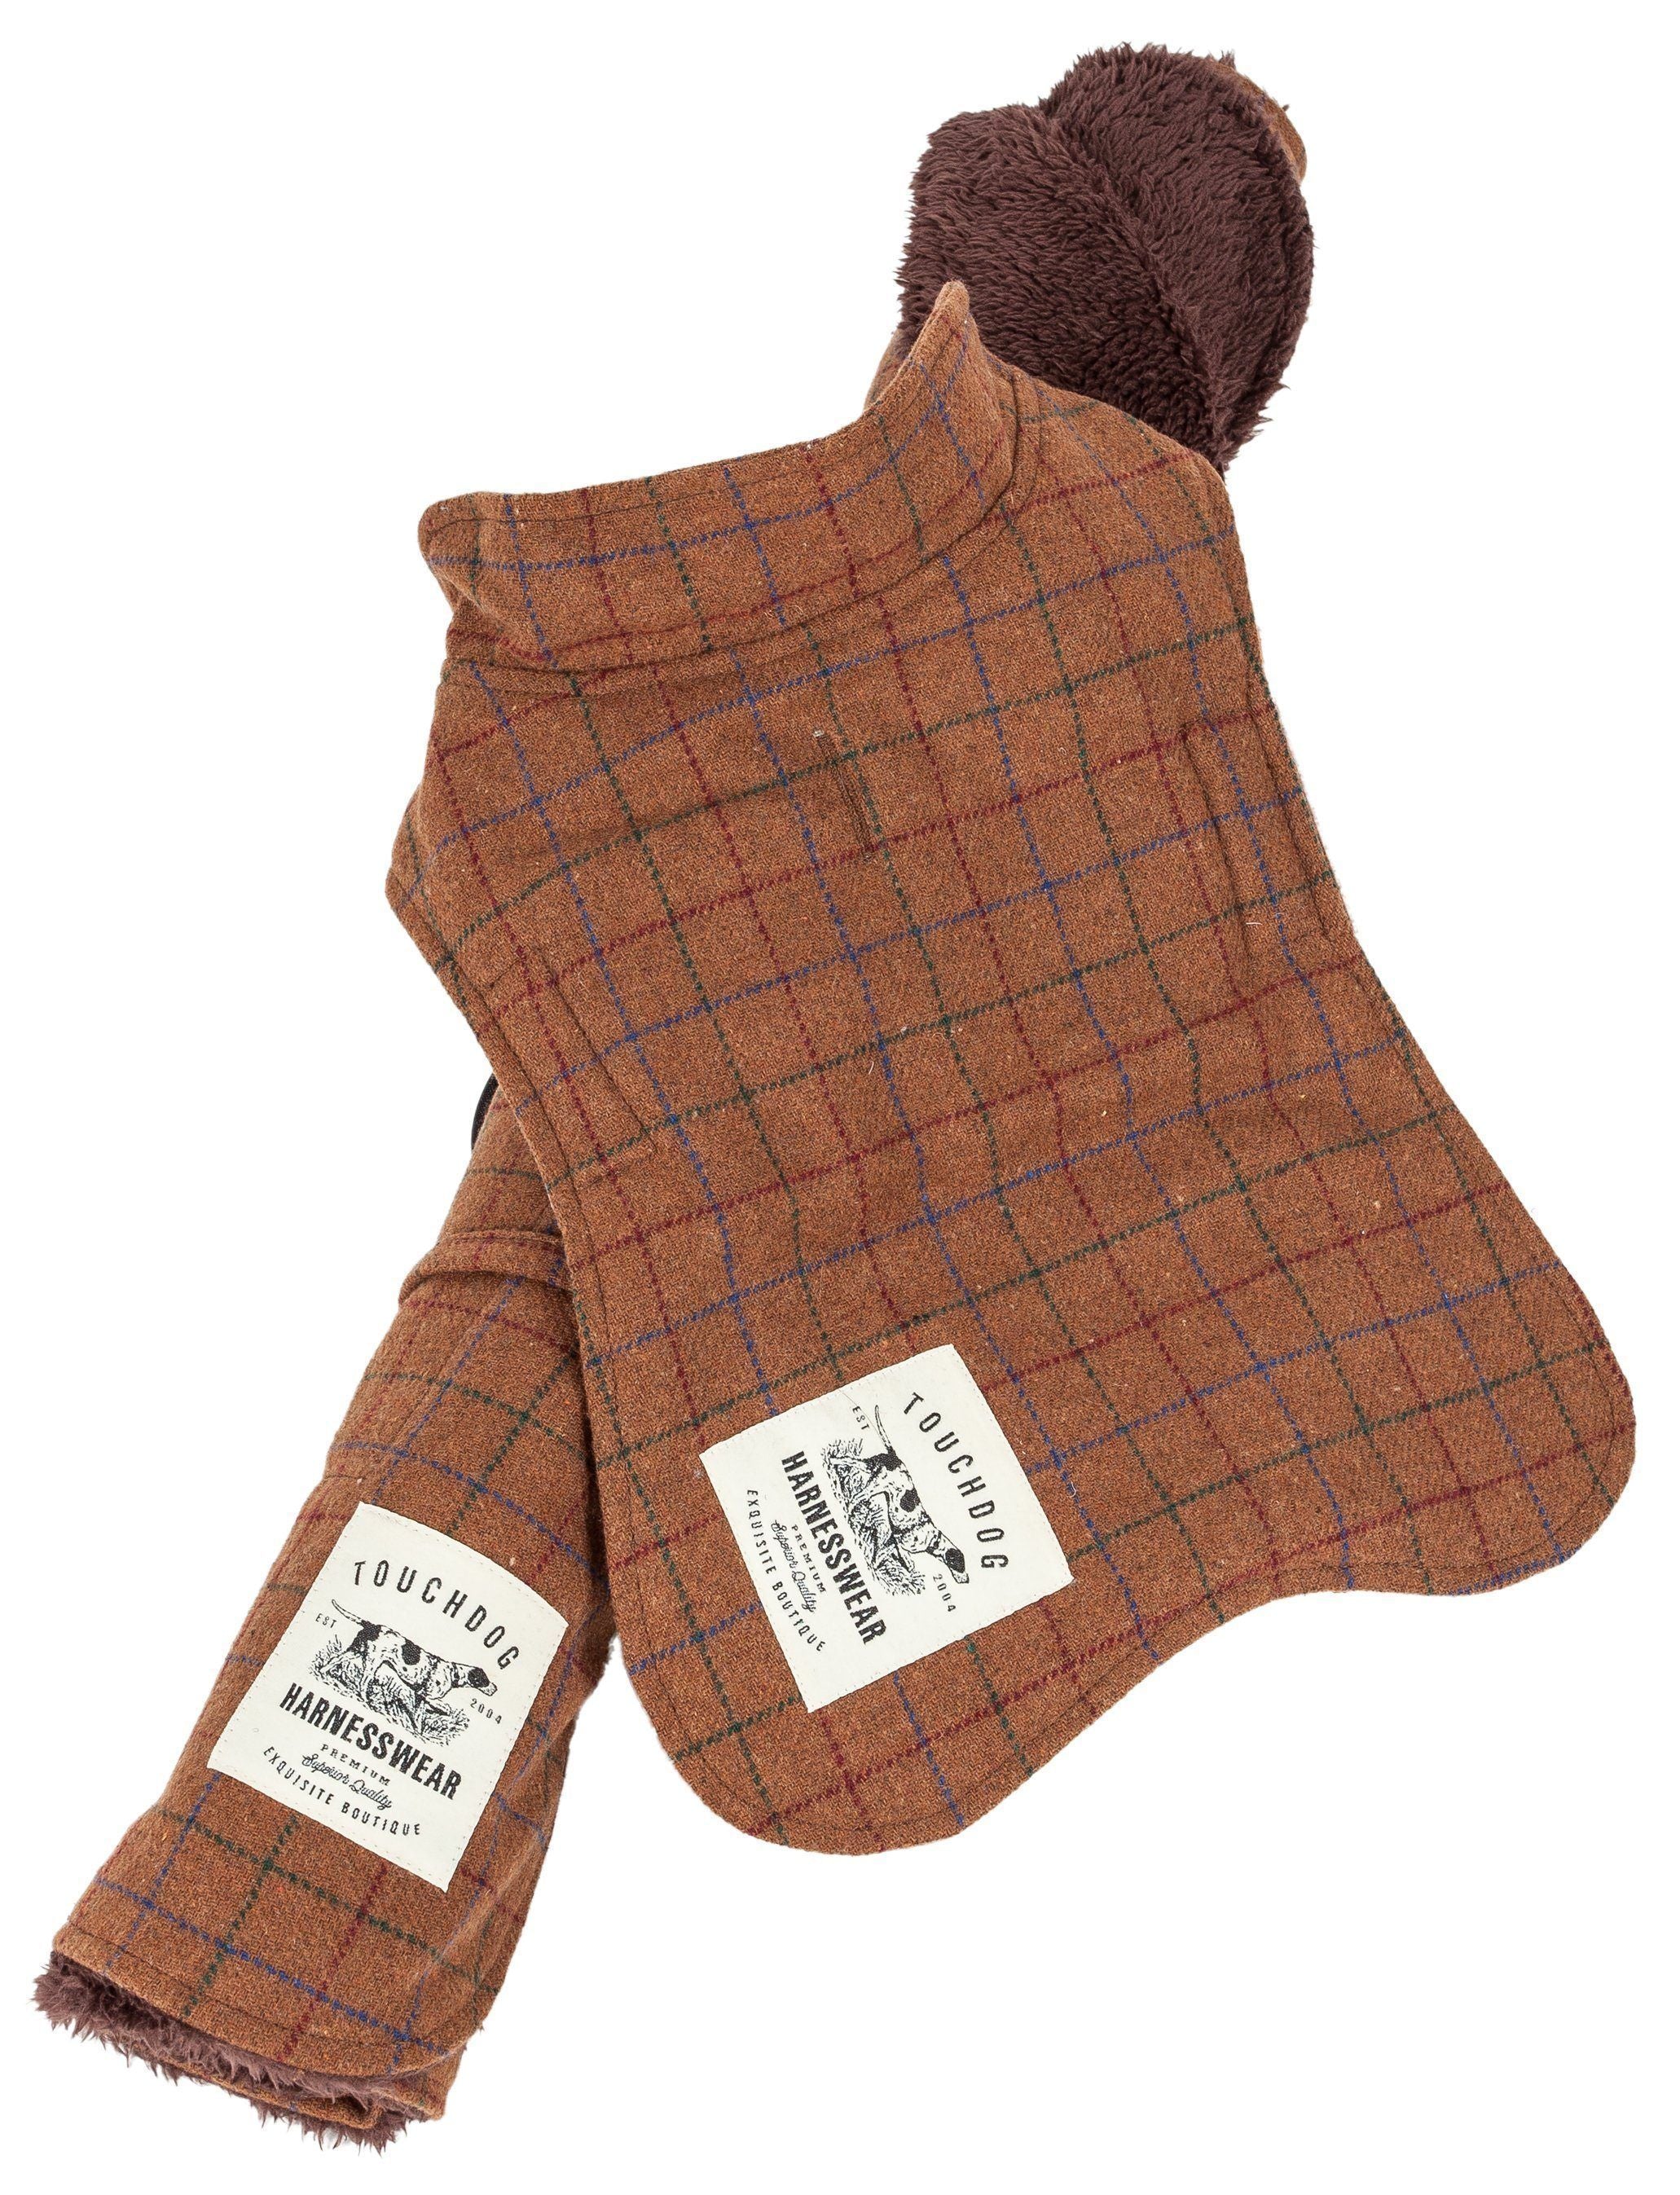 Touchdog ® 2-In-1 Windowpane Plaid Dog Jacket and Matching Reversible Dog Mat X-Small Brown Plaid